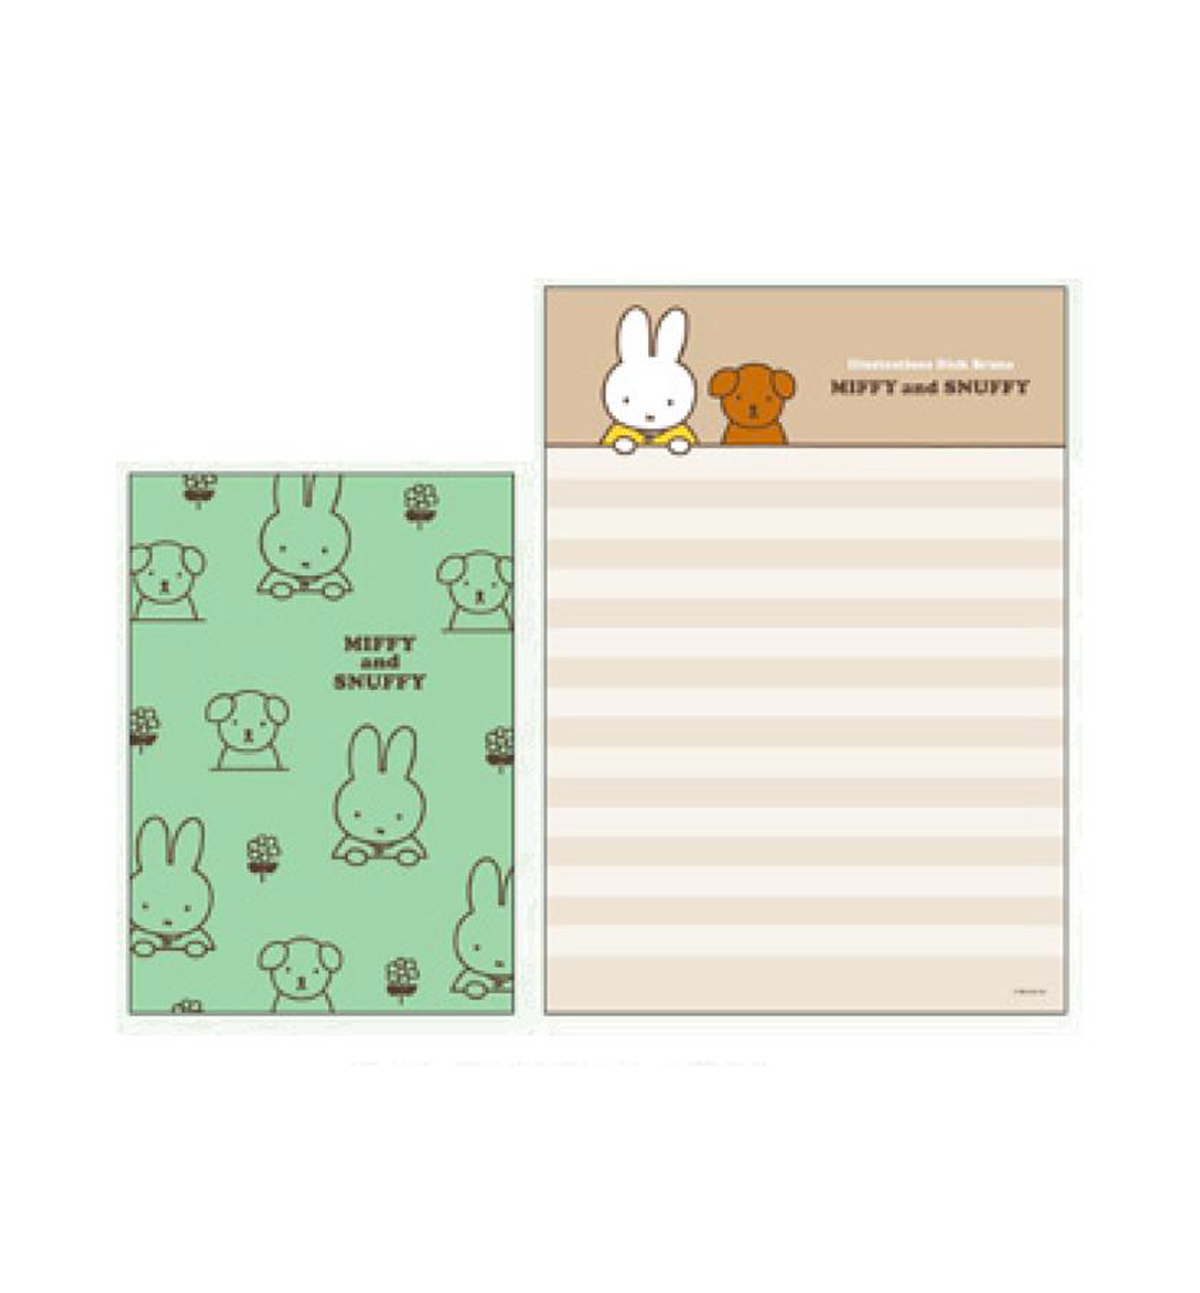 Miffy & Snuffy Letter Set [Beige]